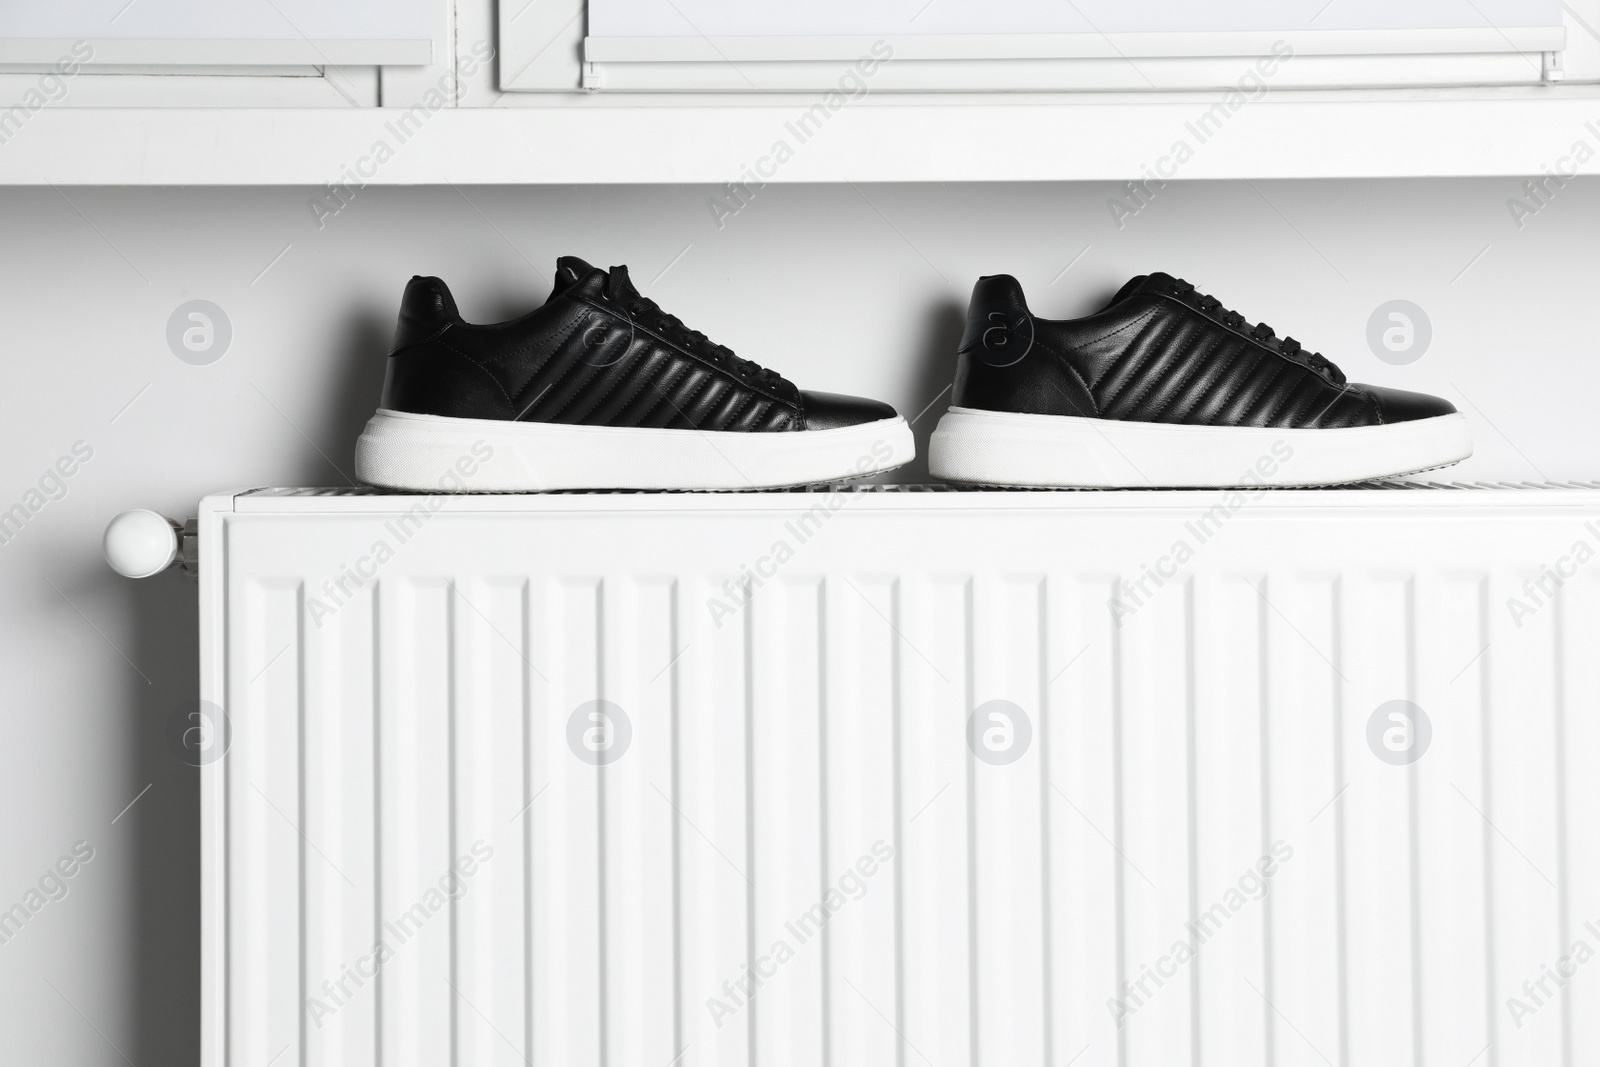 Photo of Black shoes on white radiator in room